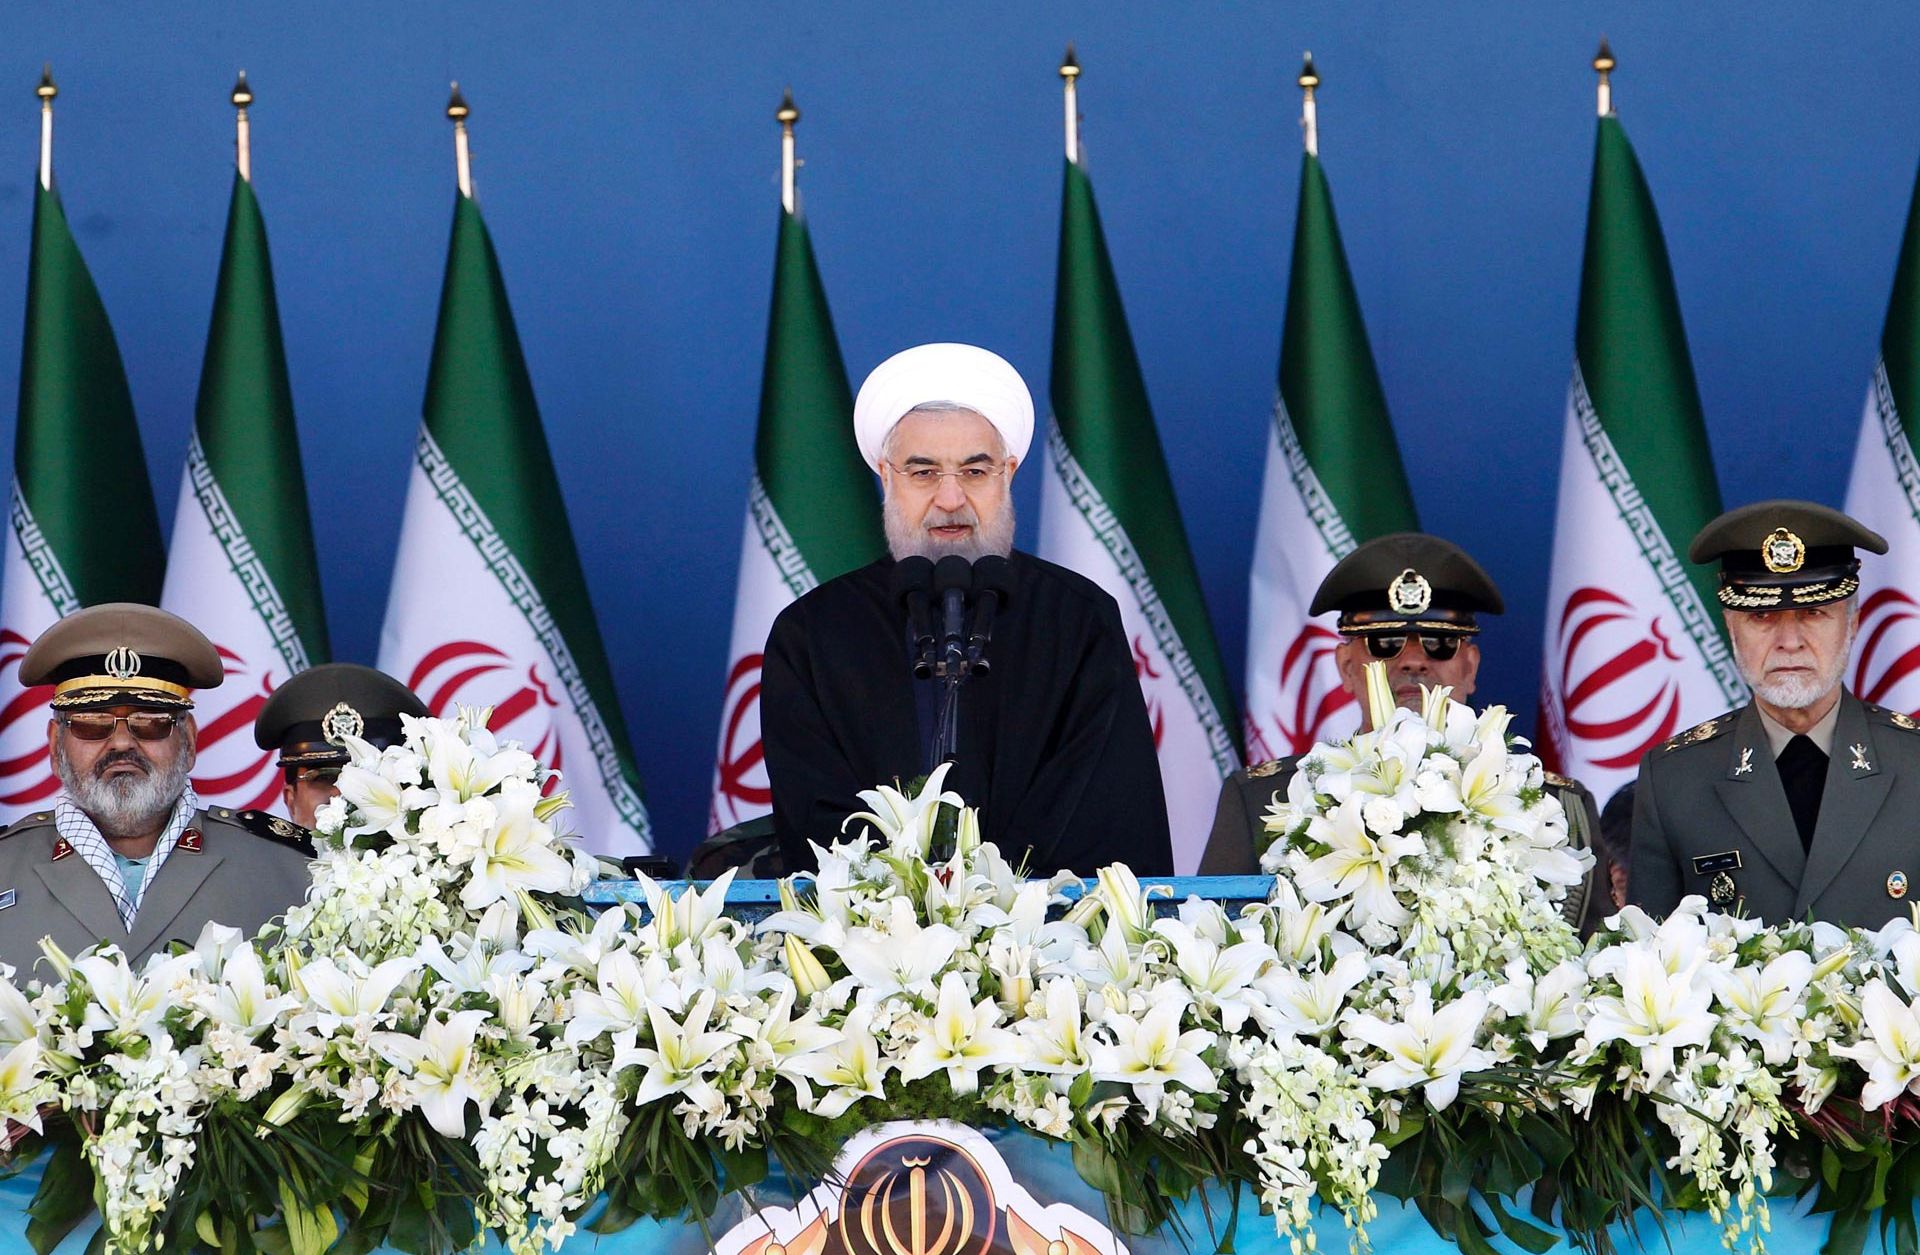 Why the Iranian President's Policies May Outlast Him